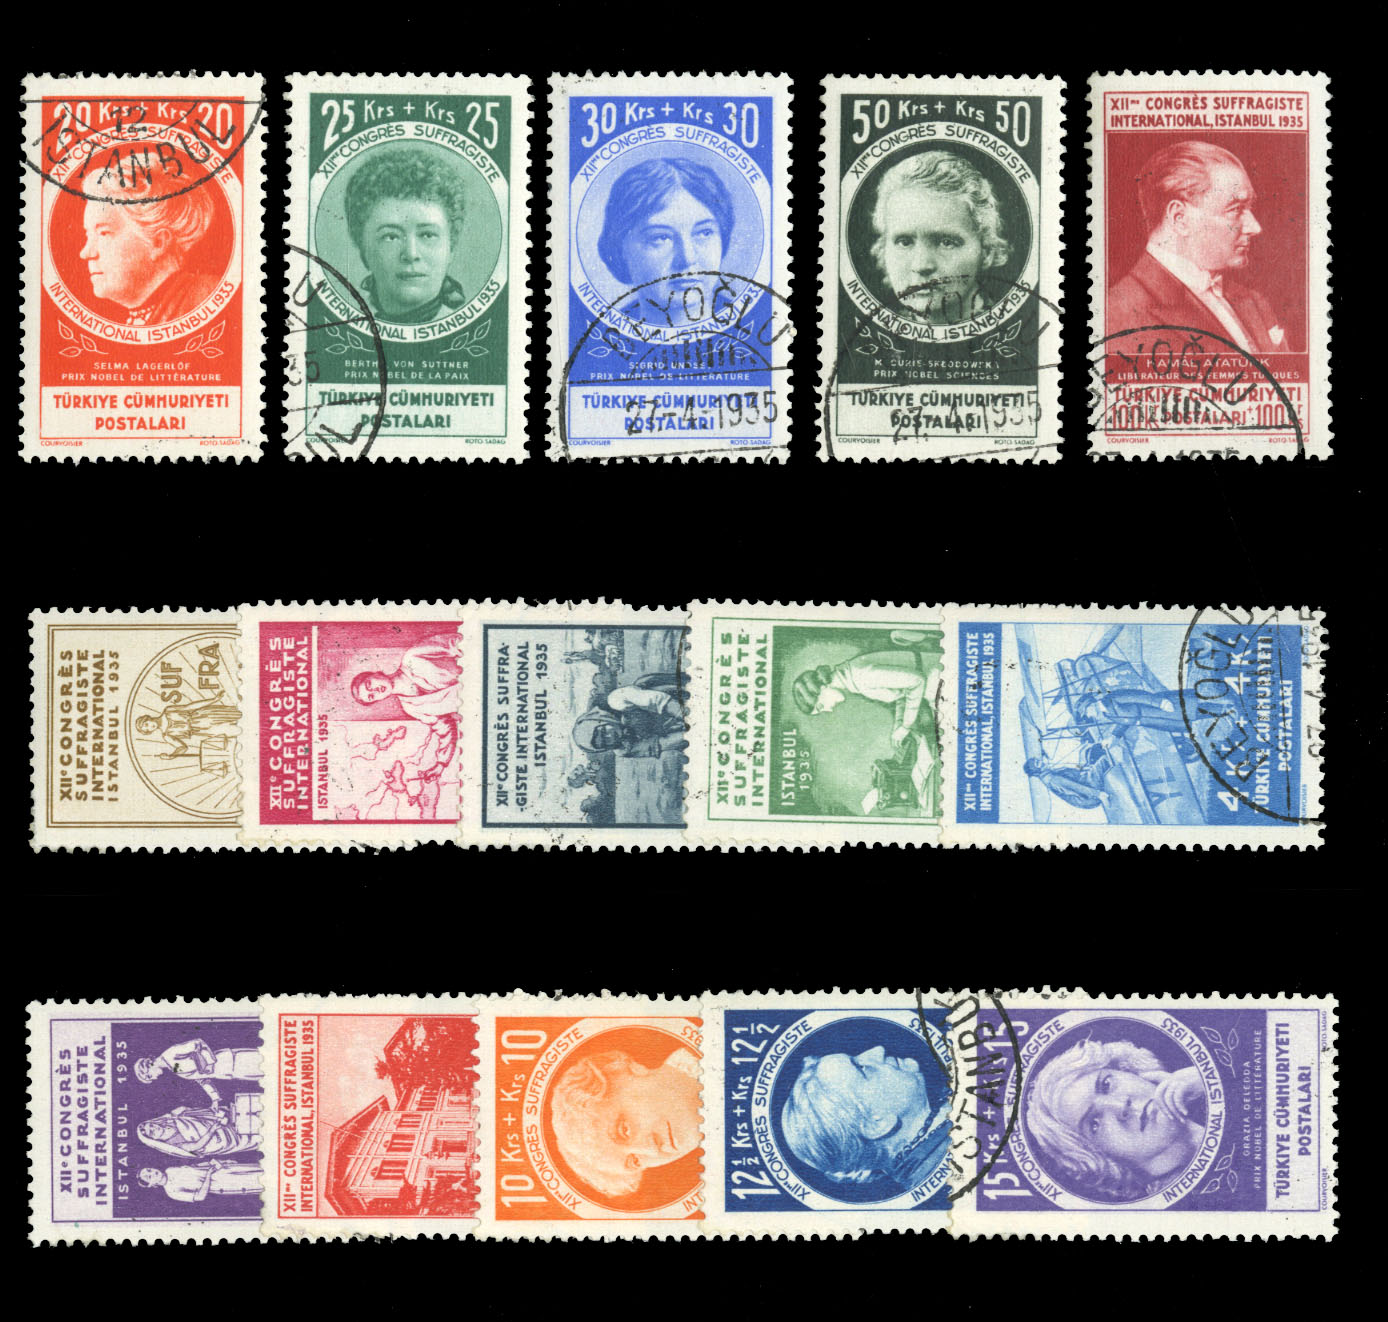 Lot 1358 - LARGE LOTS AND COLLECTIONS AUSTRIA  -  Cherrystone Auctions U.S. & Worldwide Stamps & Postal History